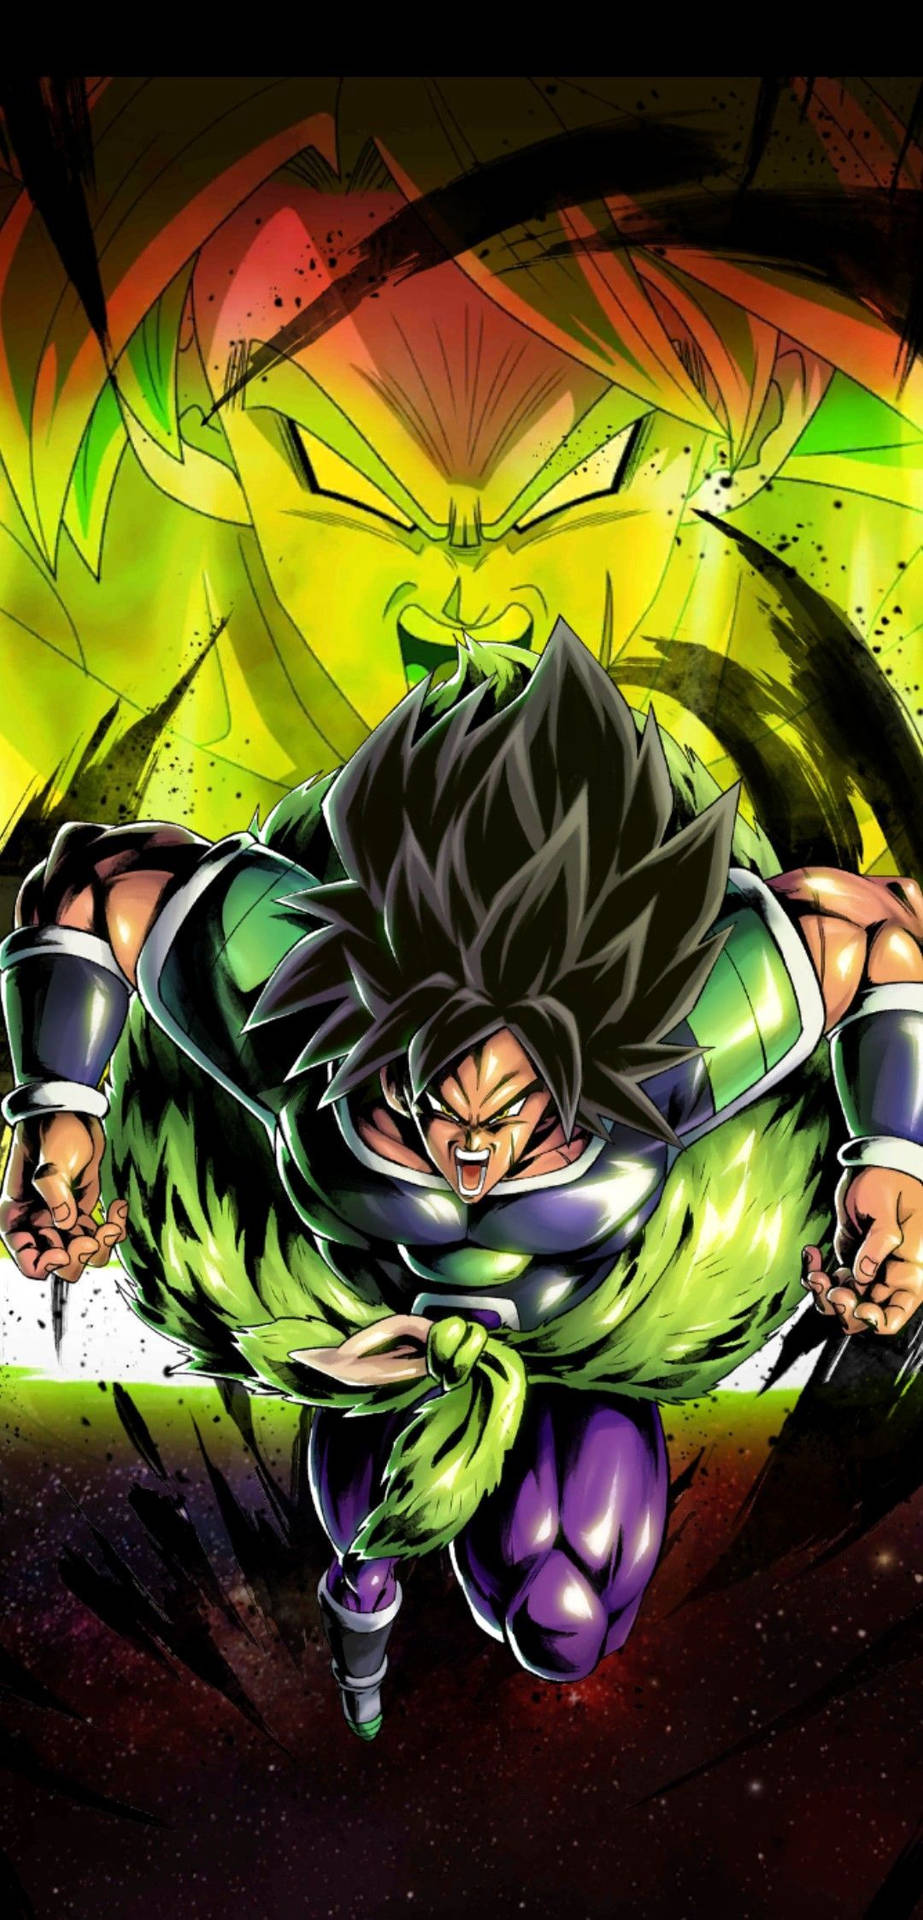 Enraged Broly Frieza Force Armor Background